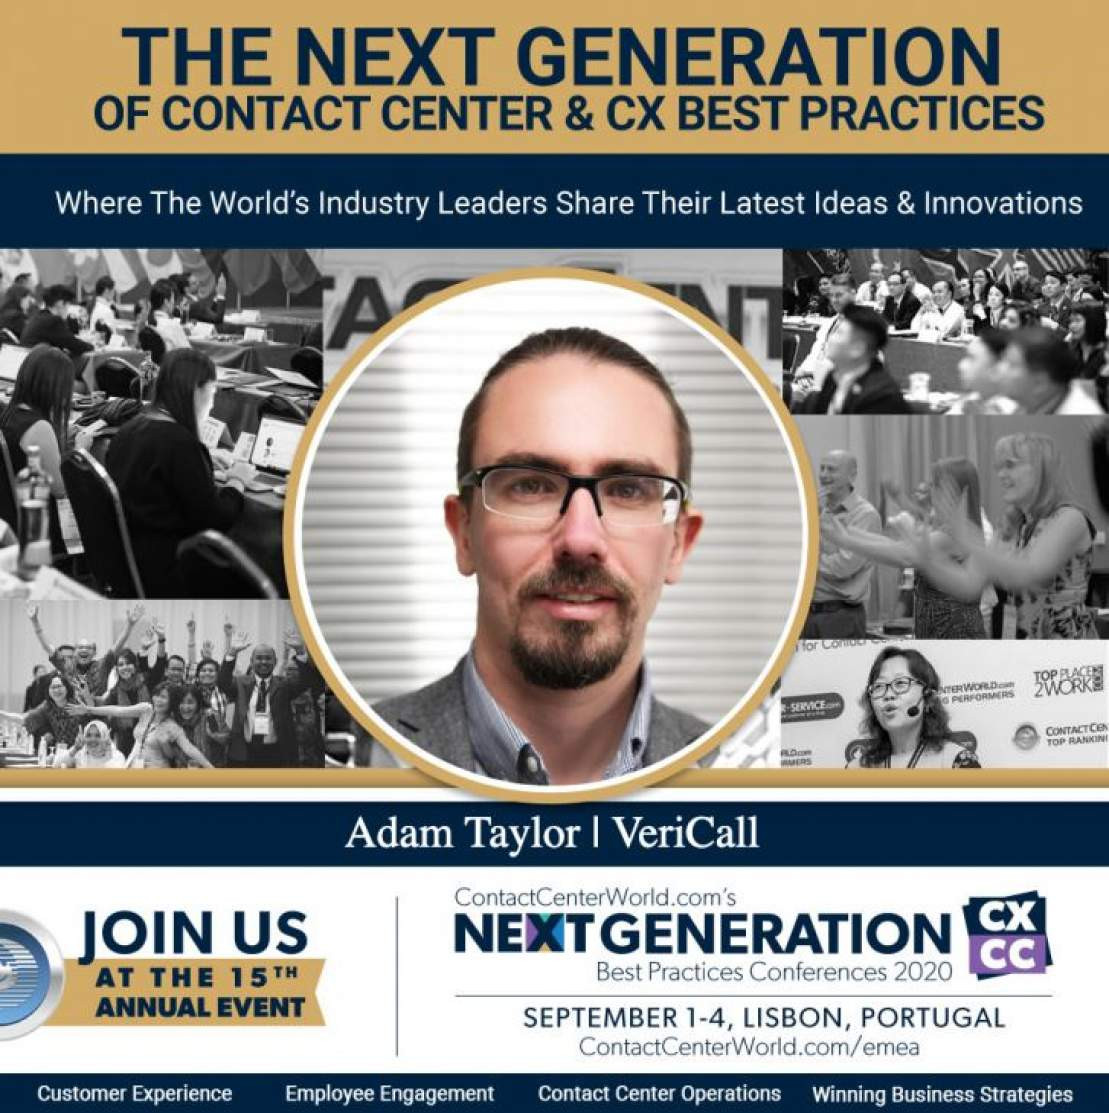 CEO of VeriCall Adam Taylor to keynote speak at Next Generation Best Practice CX & CC Conference